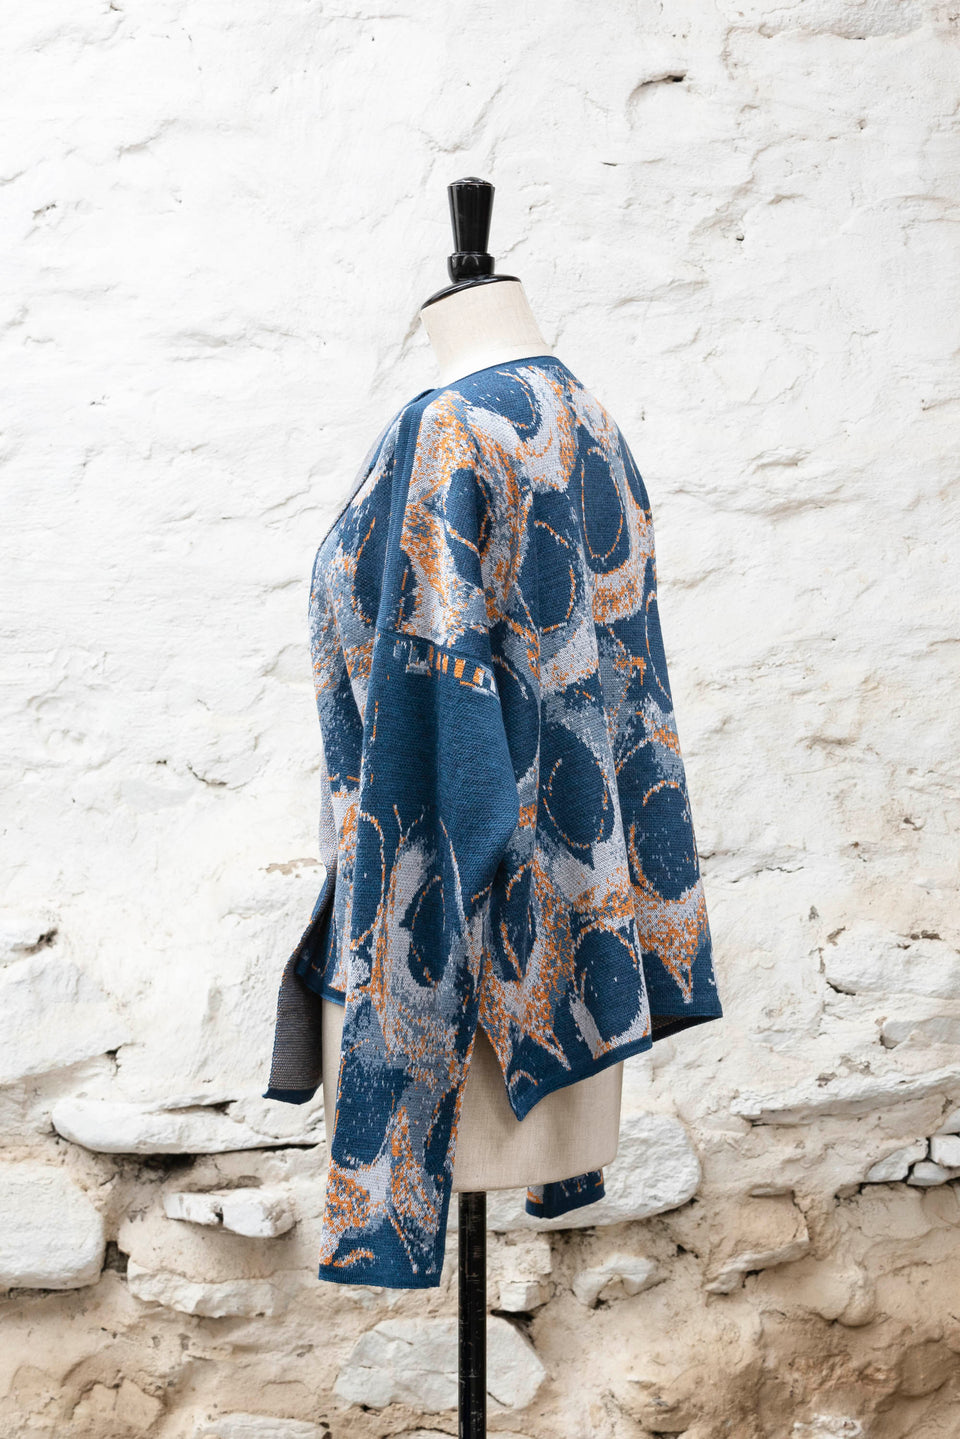 Knitted jacket inspired by the Shetland coastal village of Hoswick. Abstract curvilinear motif in blues with orange highlights . Asymmetric design with lapels that fold back. Shown side-on, on a vintage mannequin, against a white washed rustic stone wall